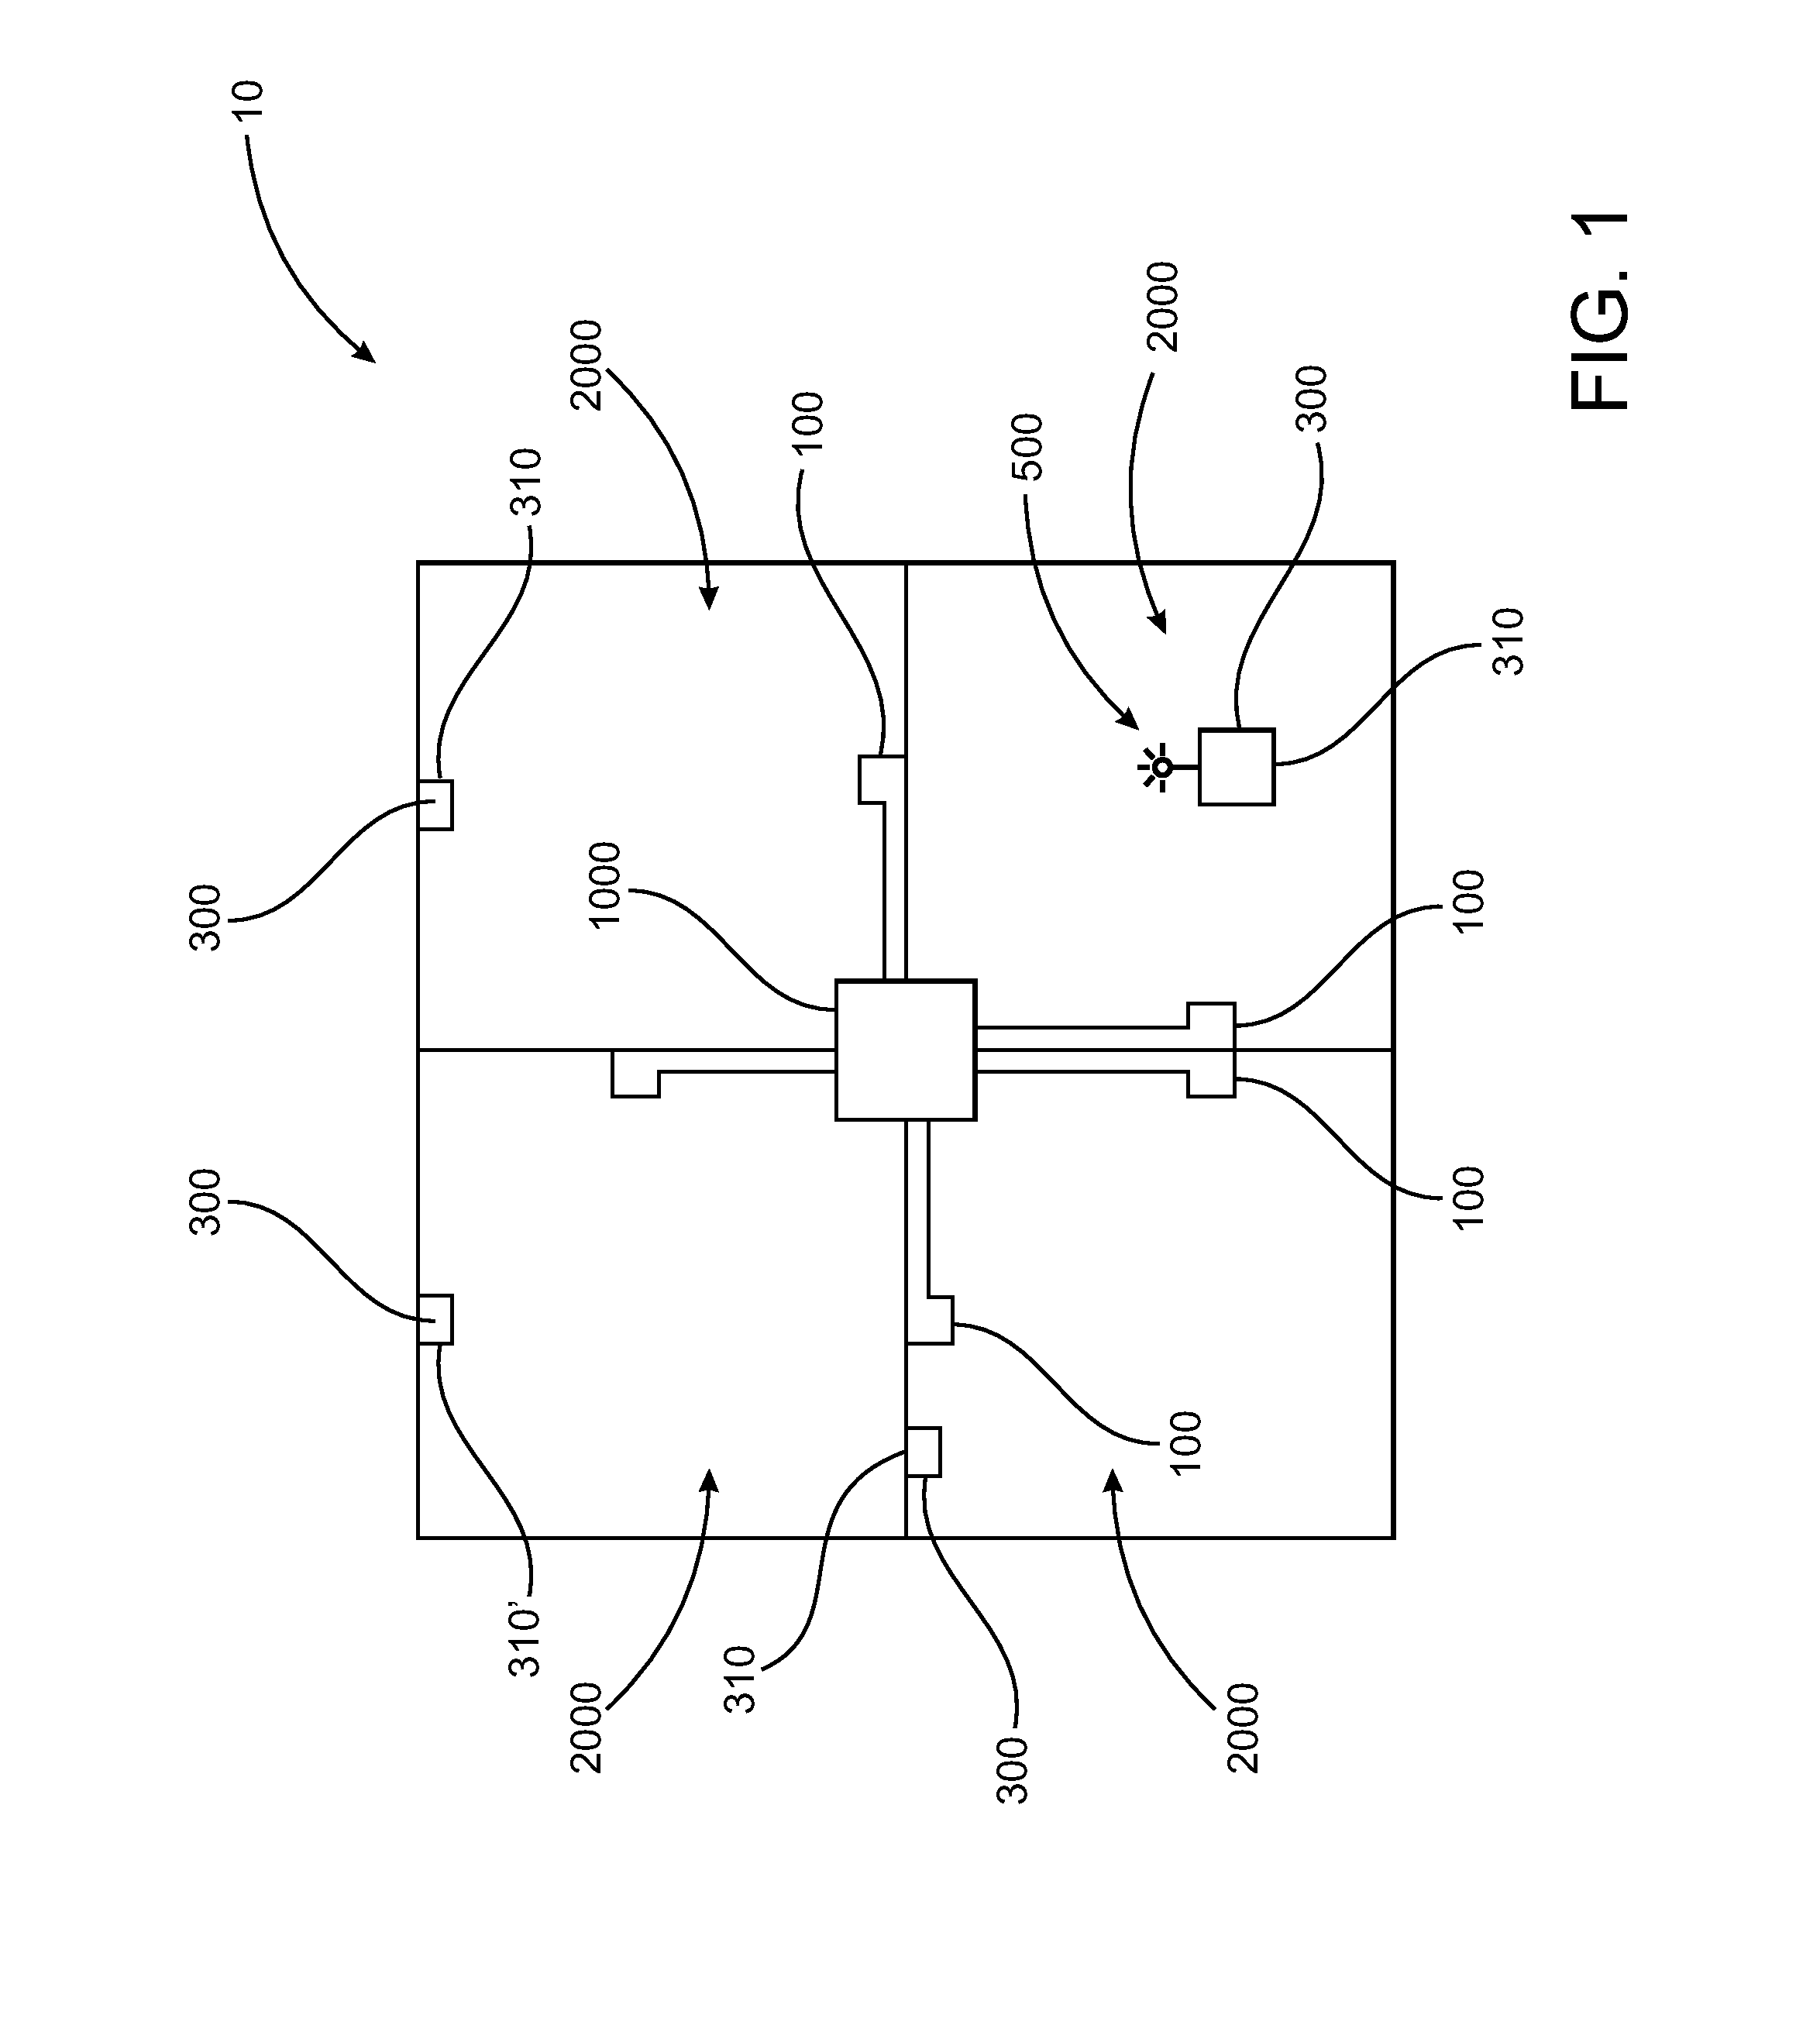 System for controlling ambient conditions within a given area with automated fluid register